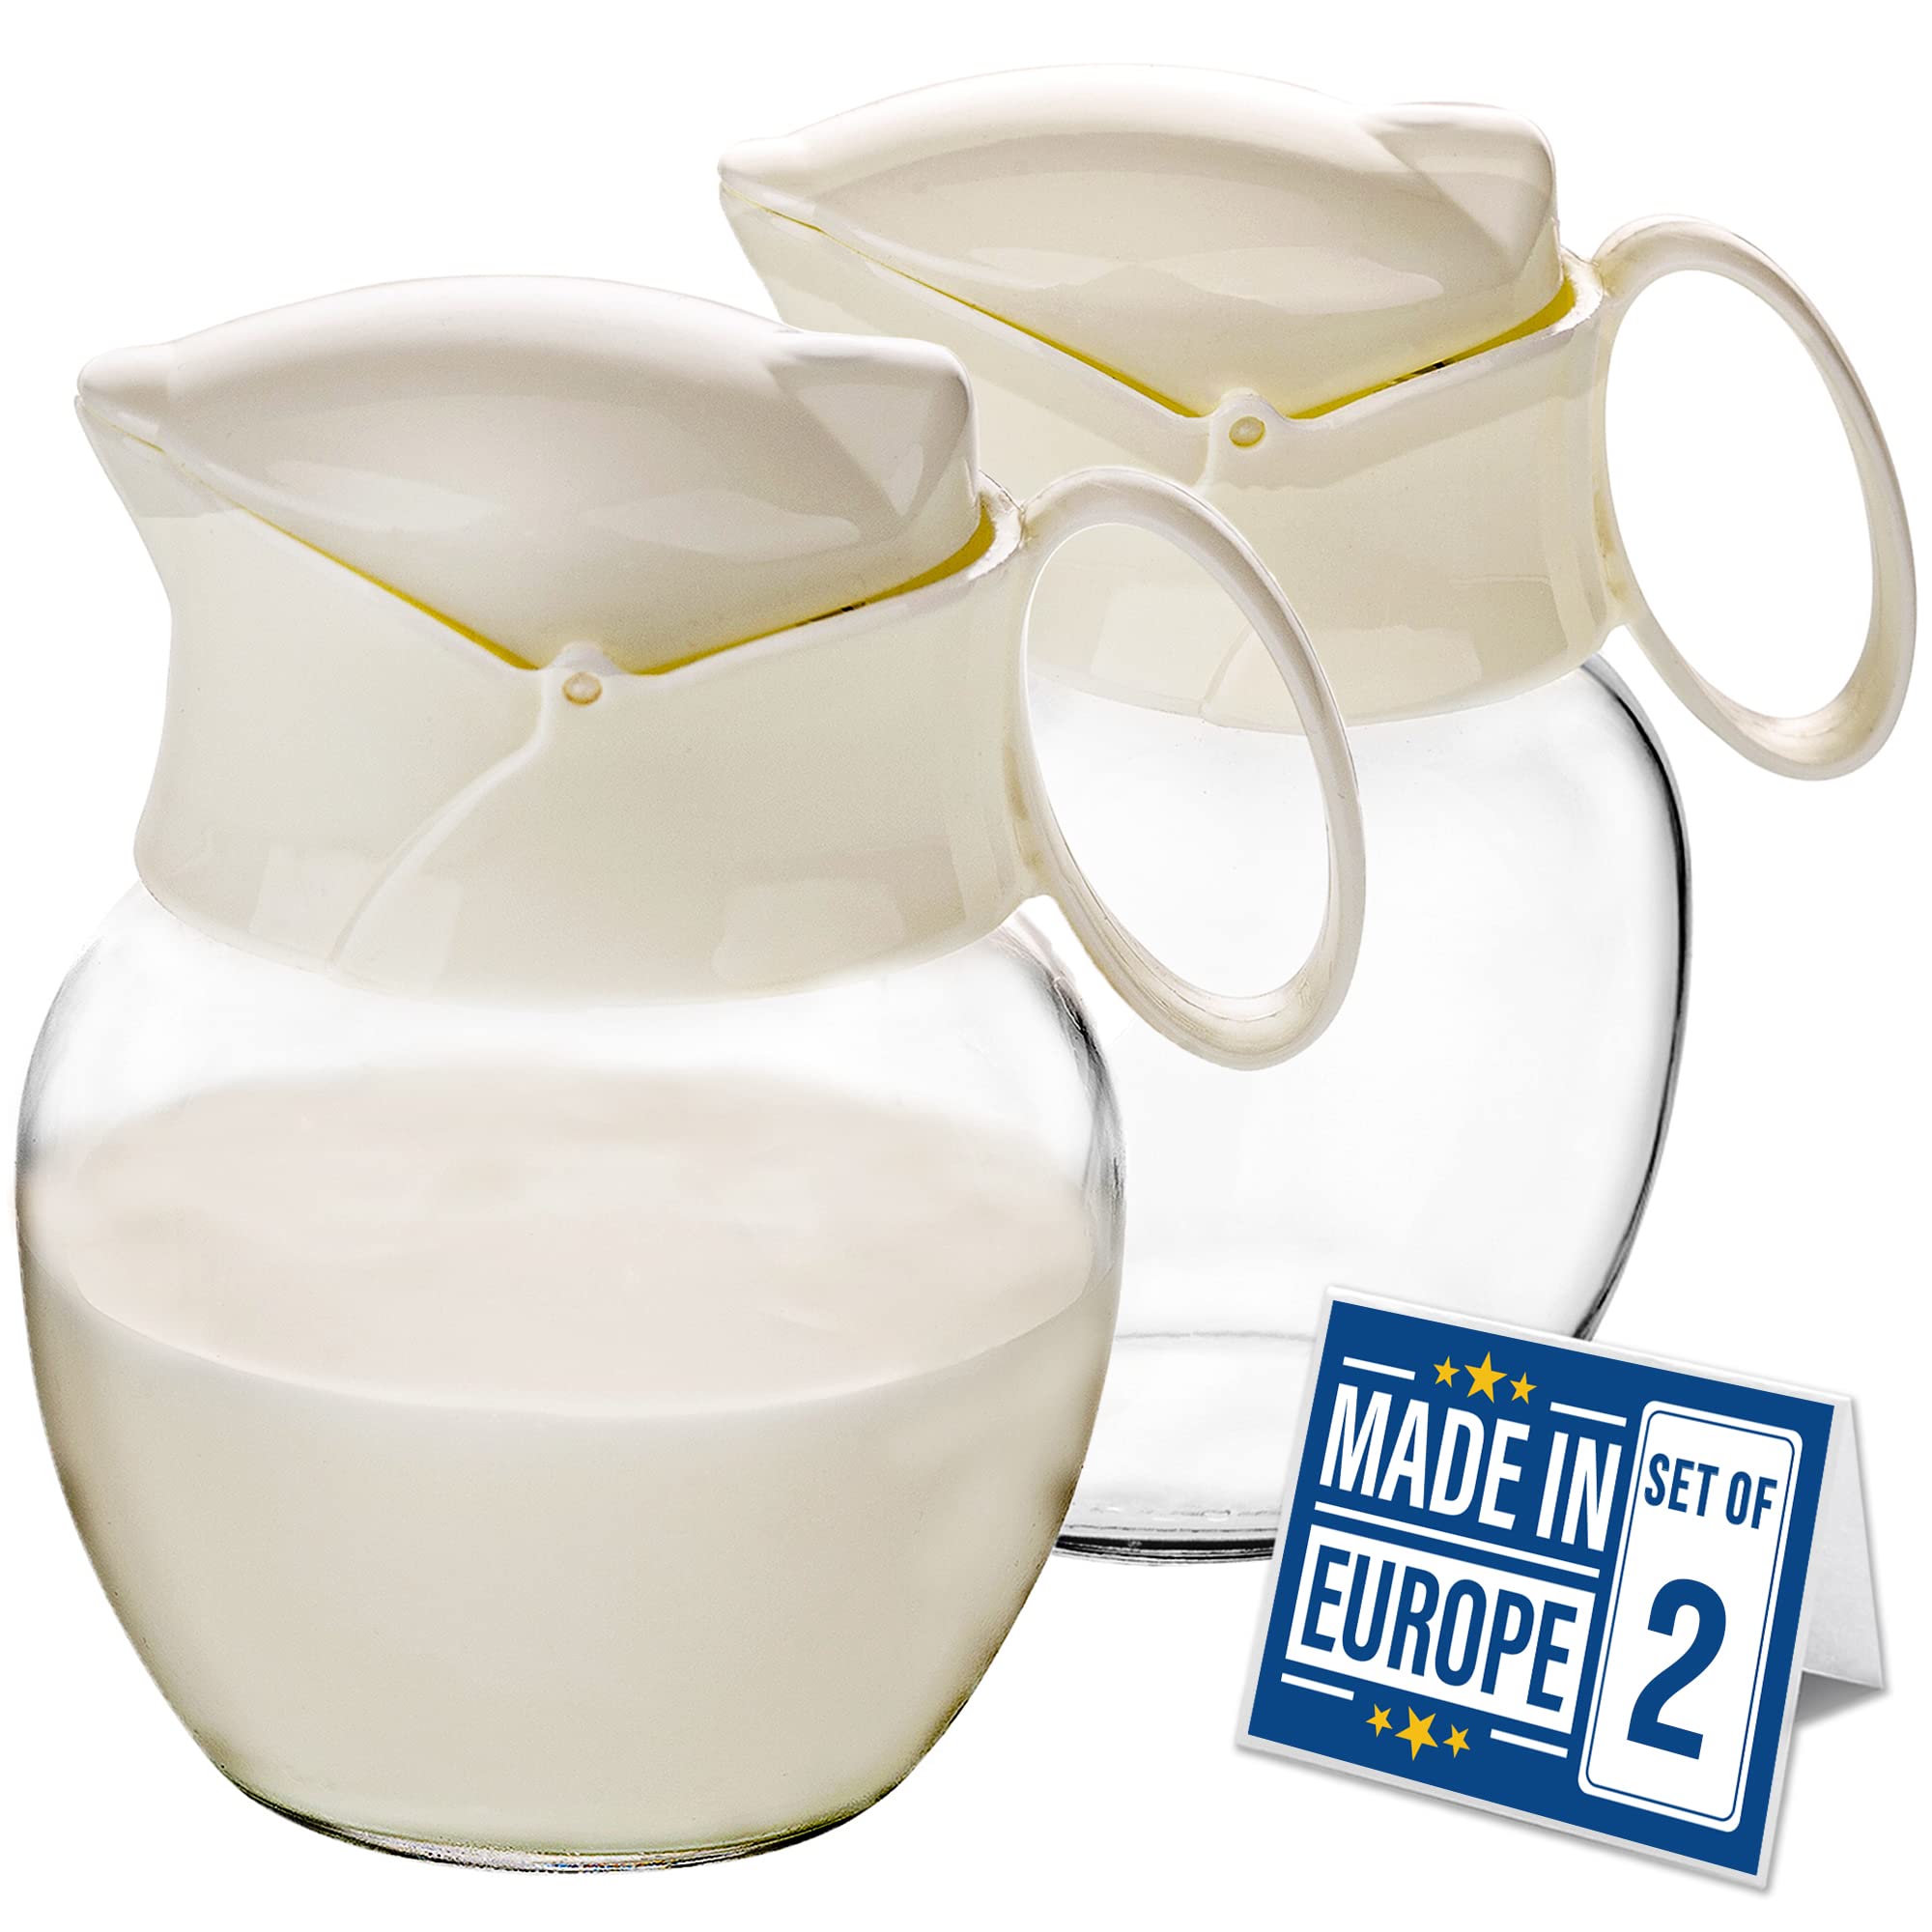 Crystalia Creamer Pitcher with Handle and Lid, Small Glass Body and BPA-Free Plastic Lid, Mullti Purpose Pourer, 7 Ounces